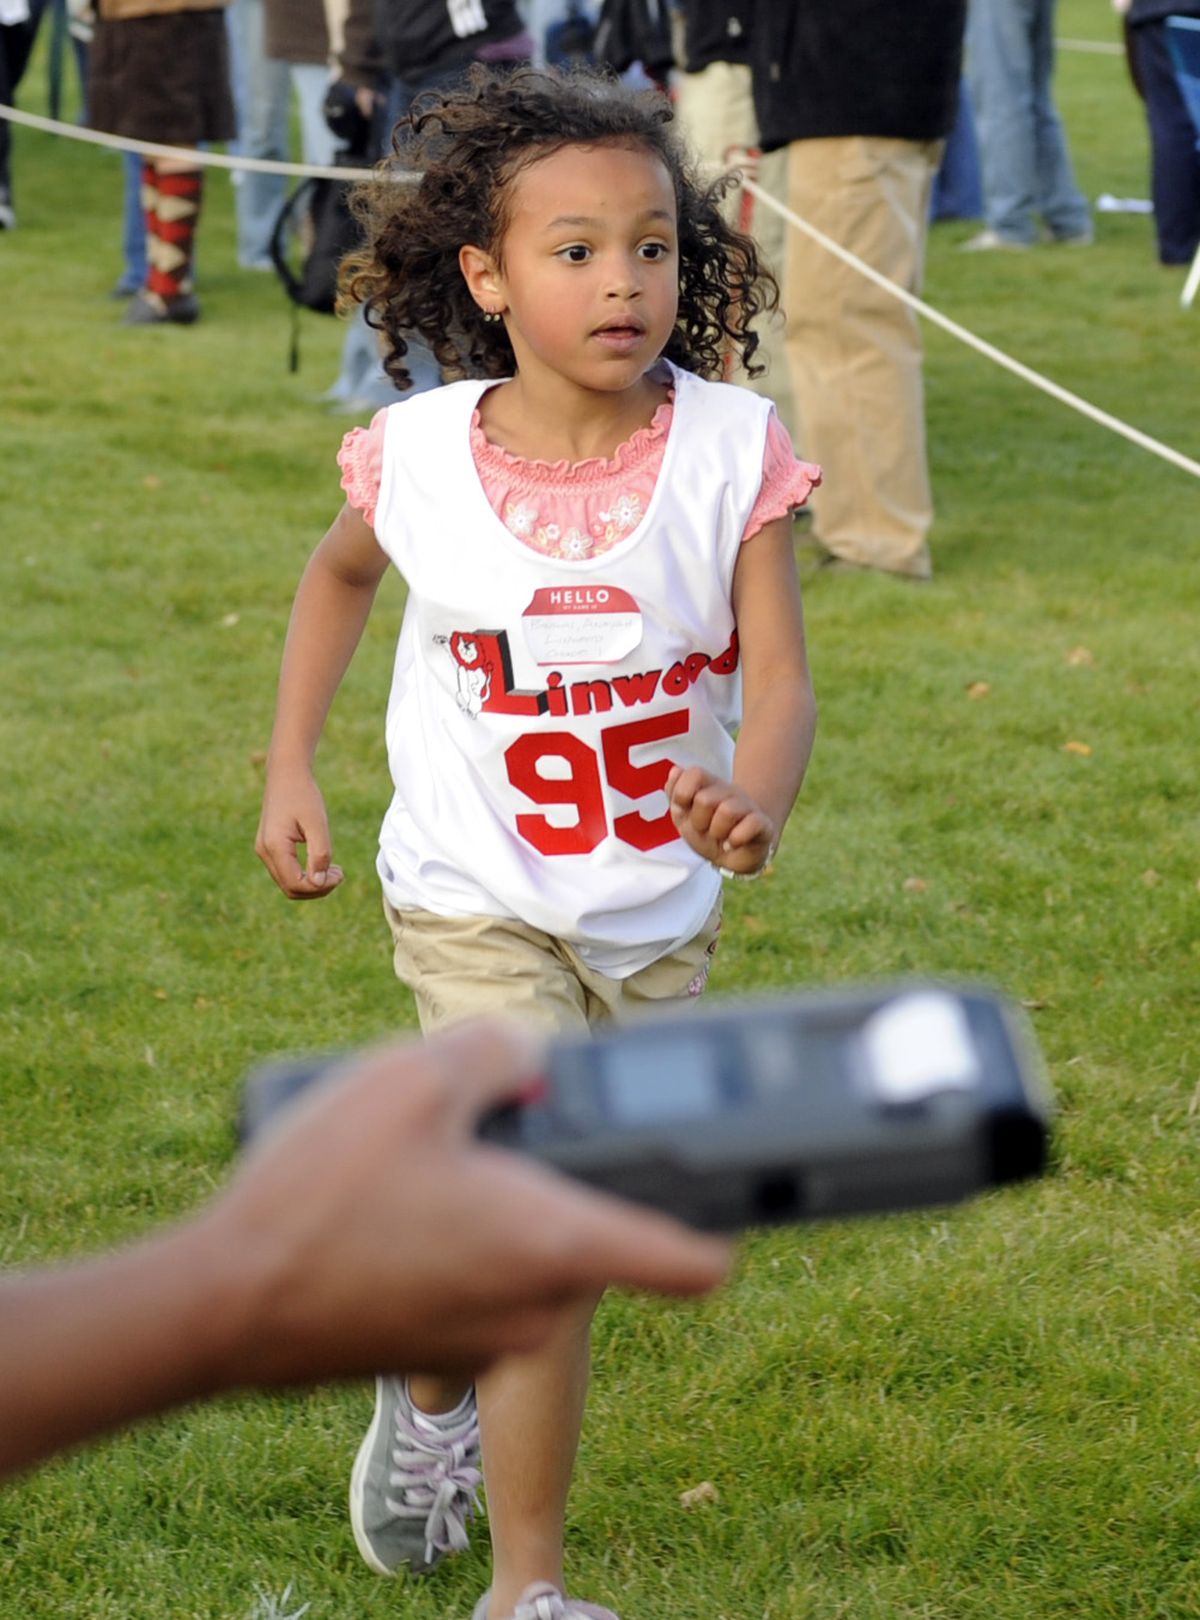 First-grader Anayah Brown from Linwood Elementary School finishes first in her race at Loma Vista Park in north Spokane. (The Spokesman-Review)